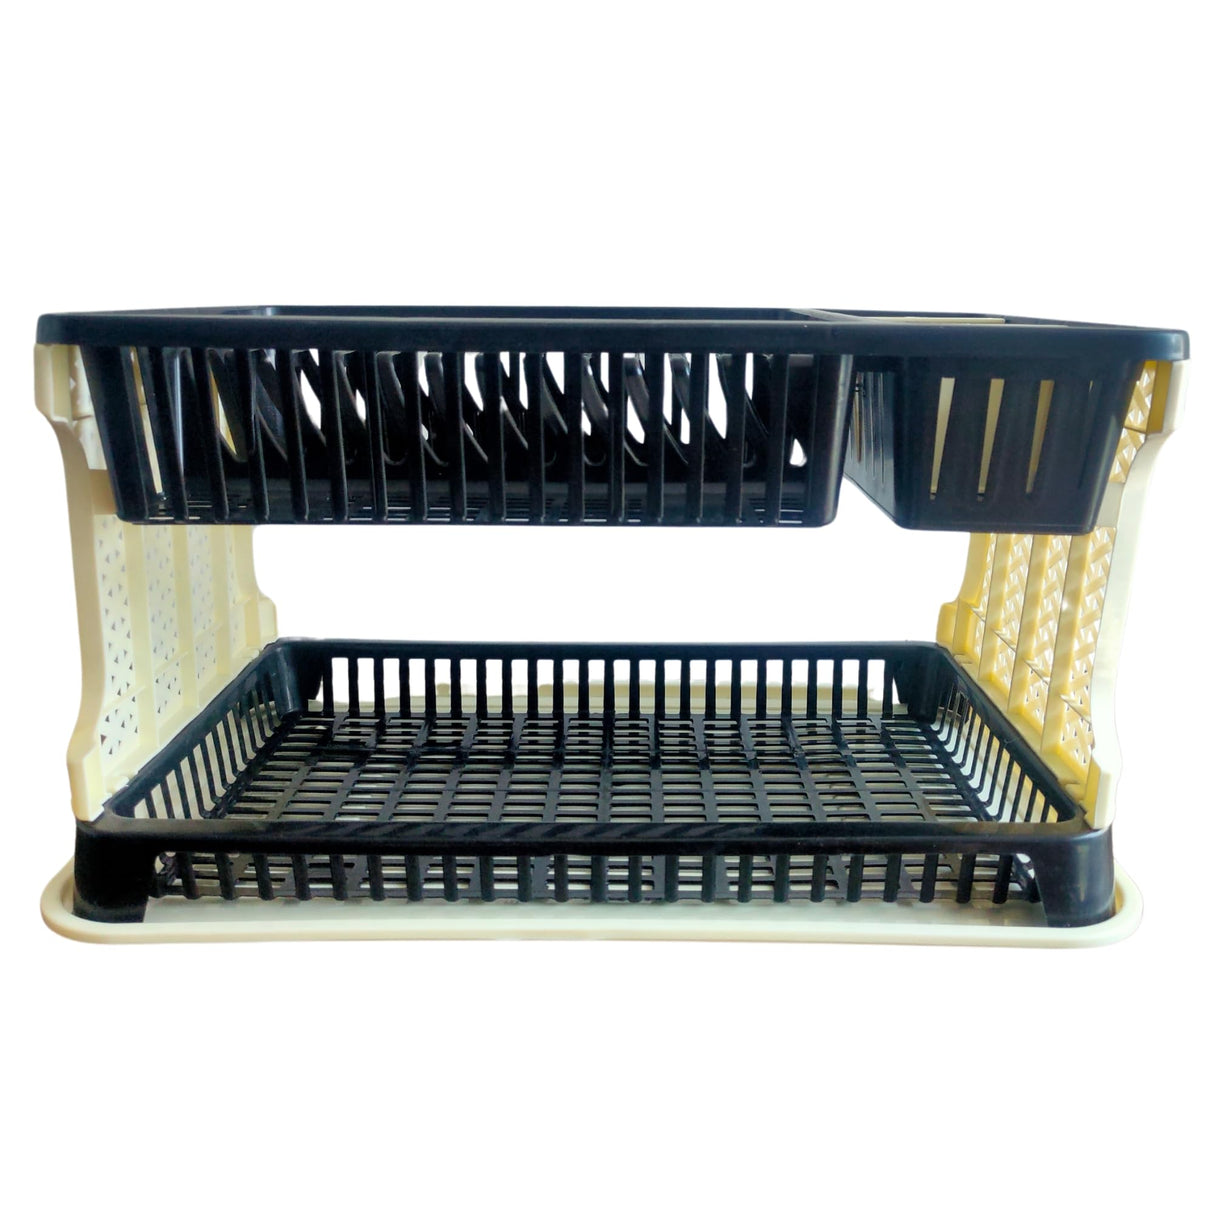 Plastic Dish Drainer 2 Layer Kitchen Dish Organizer Storage Rack, Cutlery Utensil, Vegetable Drying Drain & Storage Stand with Water Storing Tray - Singhal Mart